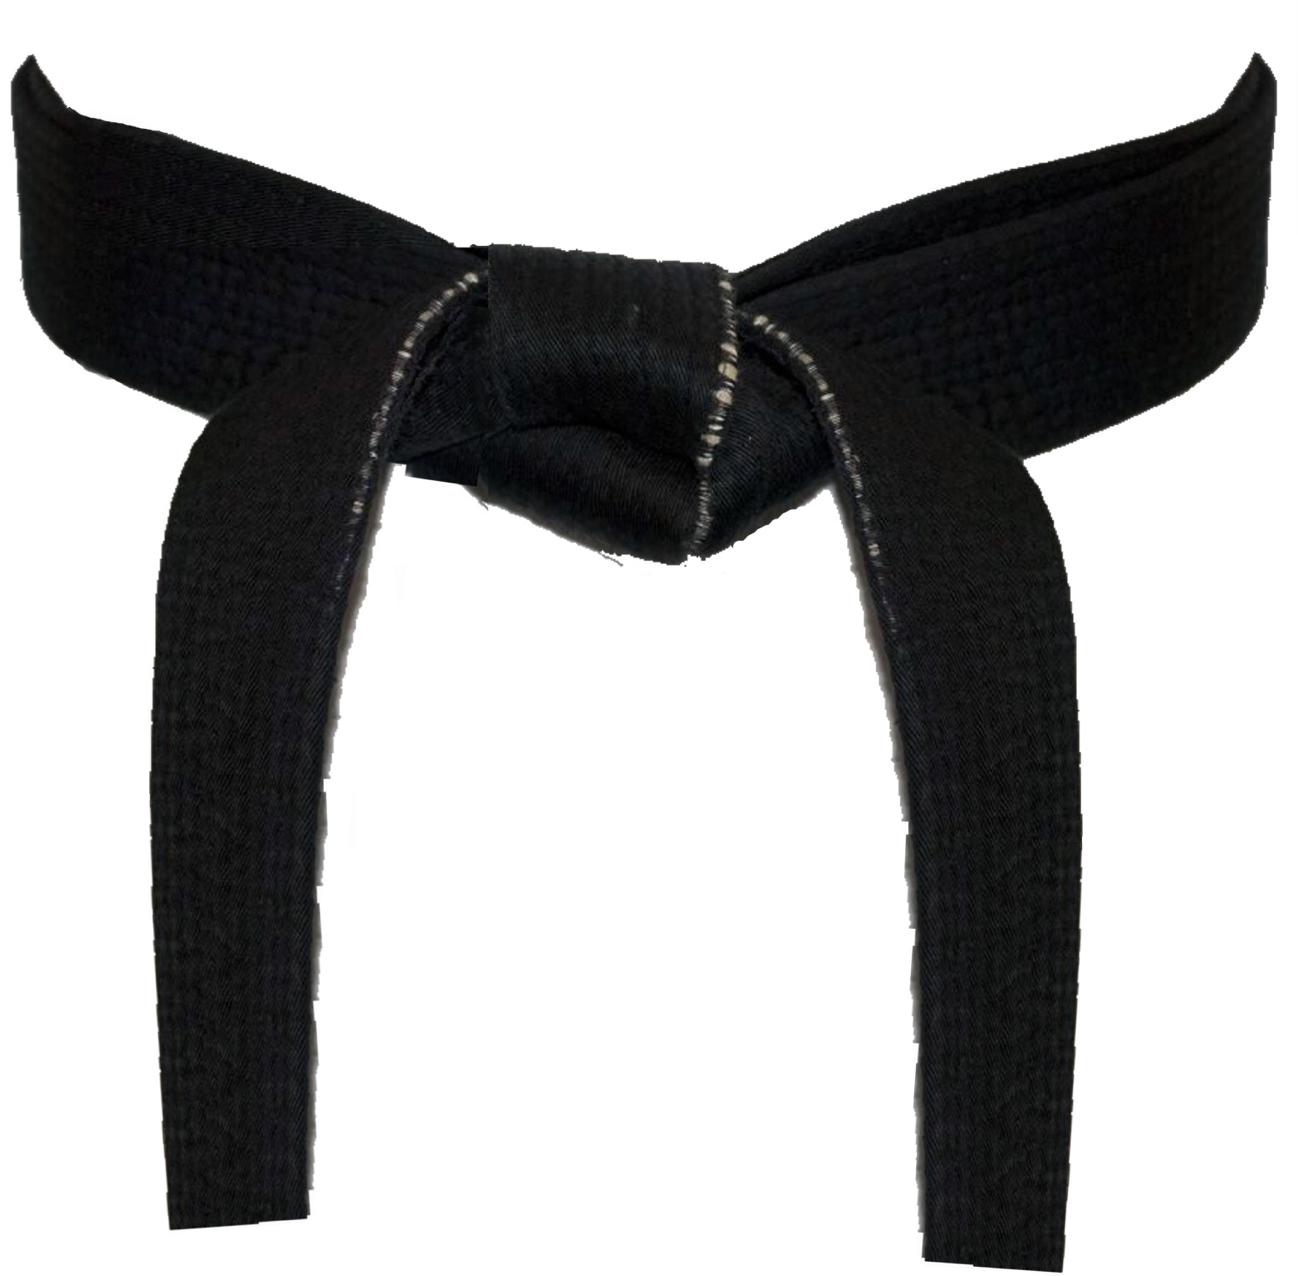 Are You Comfortable Wearing Your Black Belt